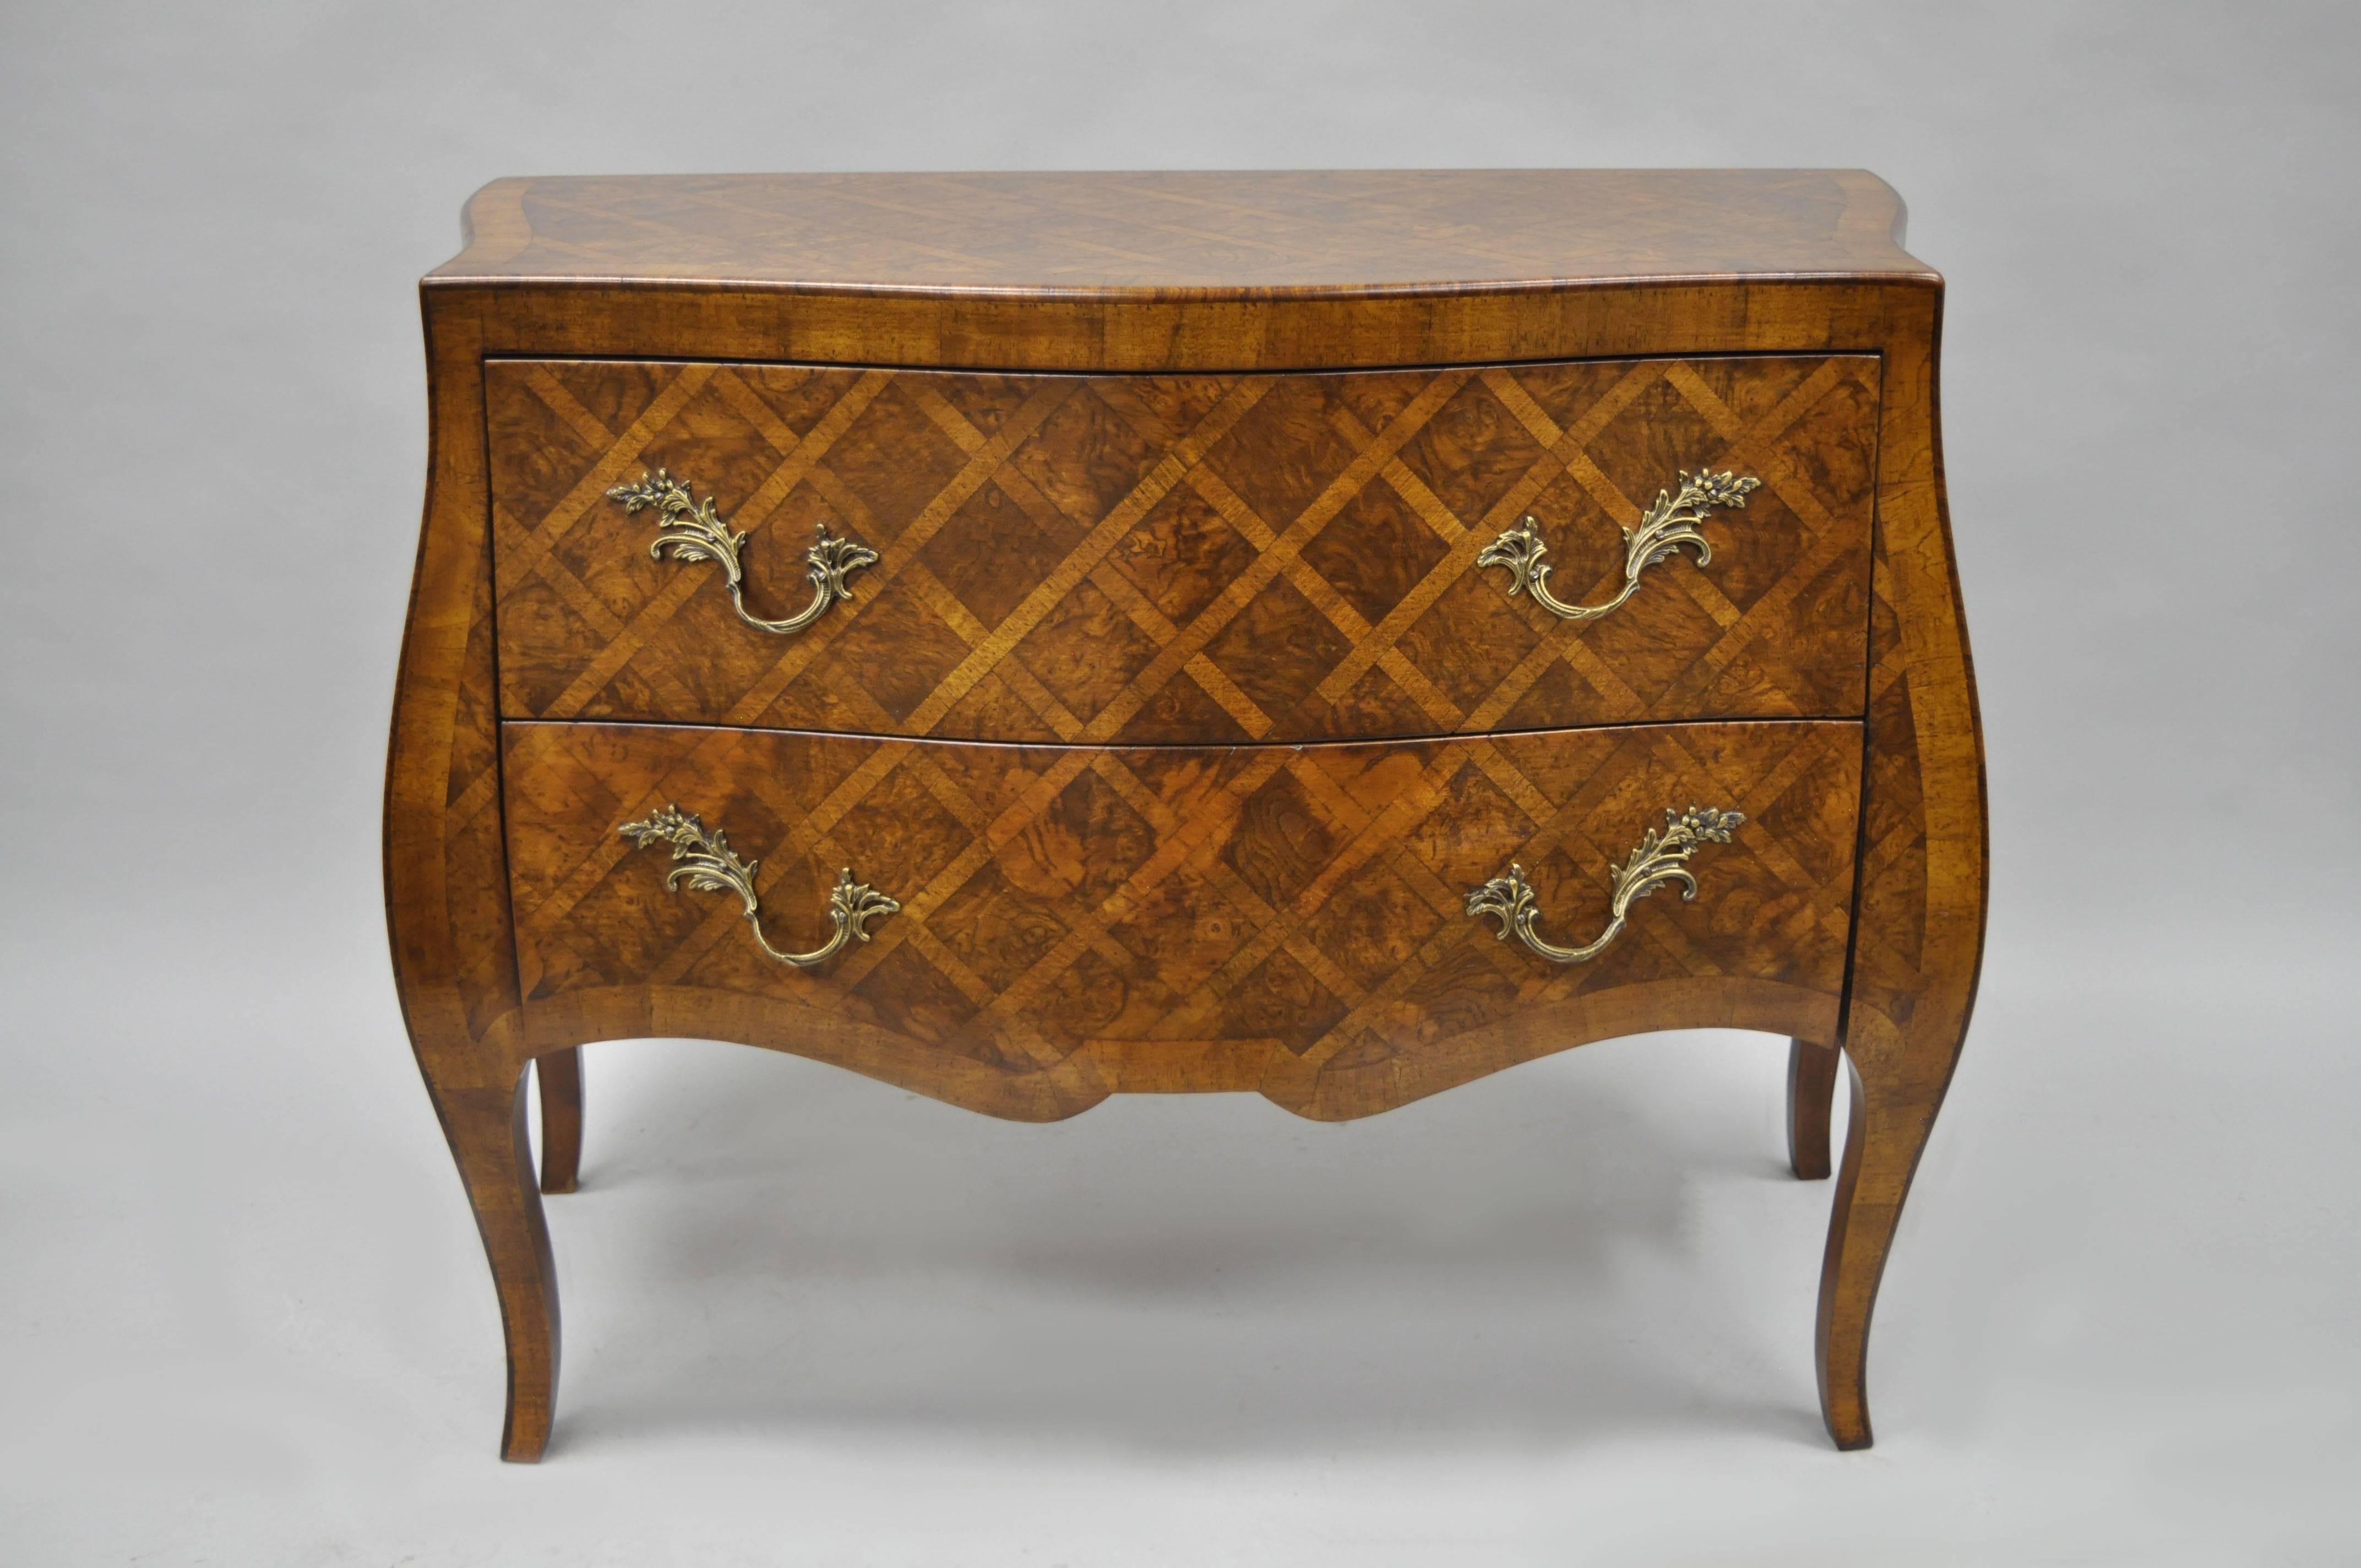 Vintage Italian Parquetry Inlaid Bombe Commode in the French Louis XV Style. Item features two drawers, brass hardware, shapely cabriole legs, and stunning parquetry inlay. Marked Italy